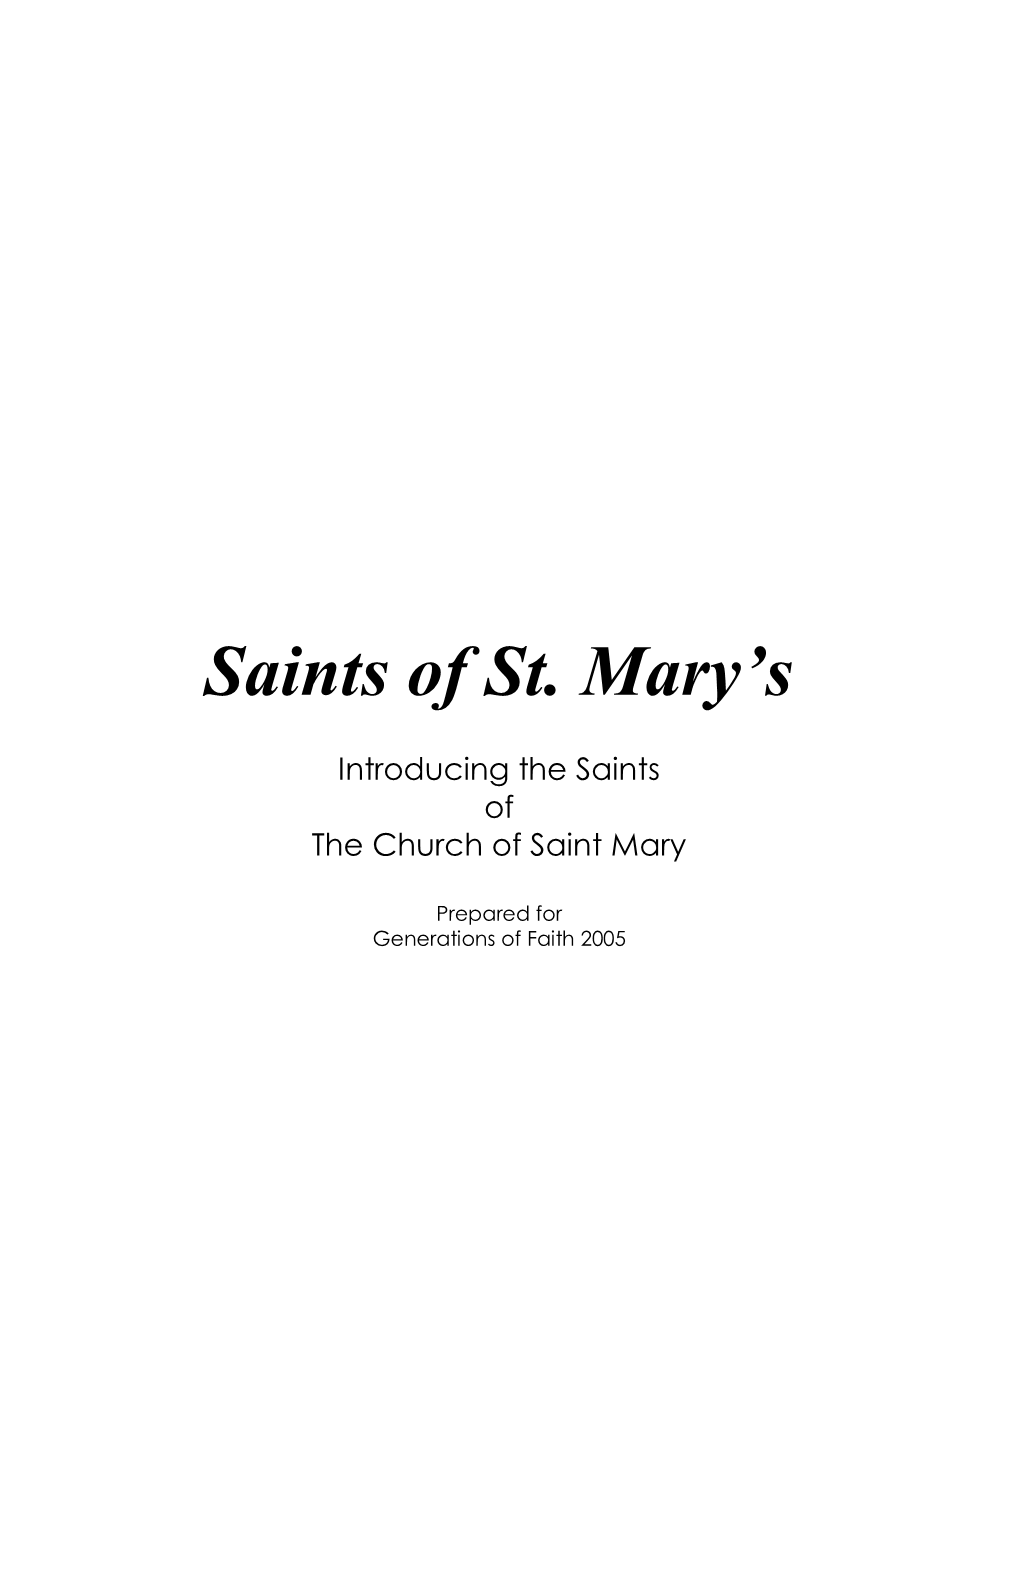 Saints of St. Mary's